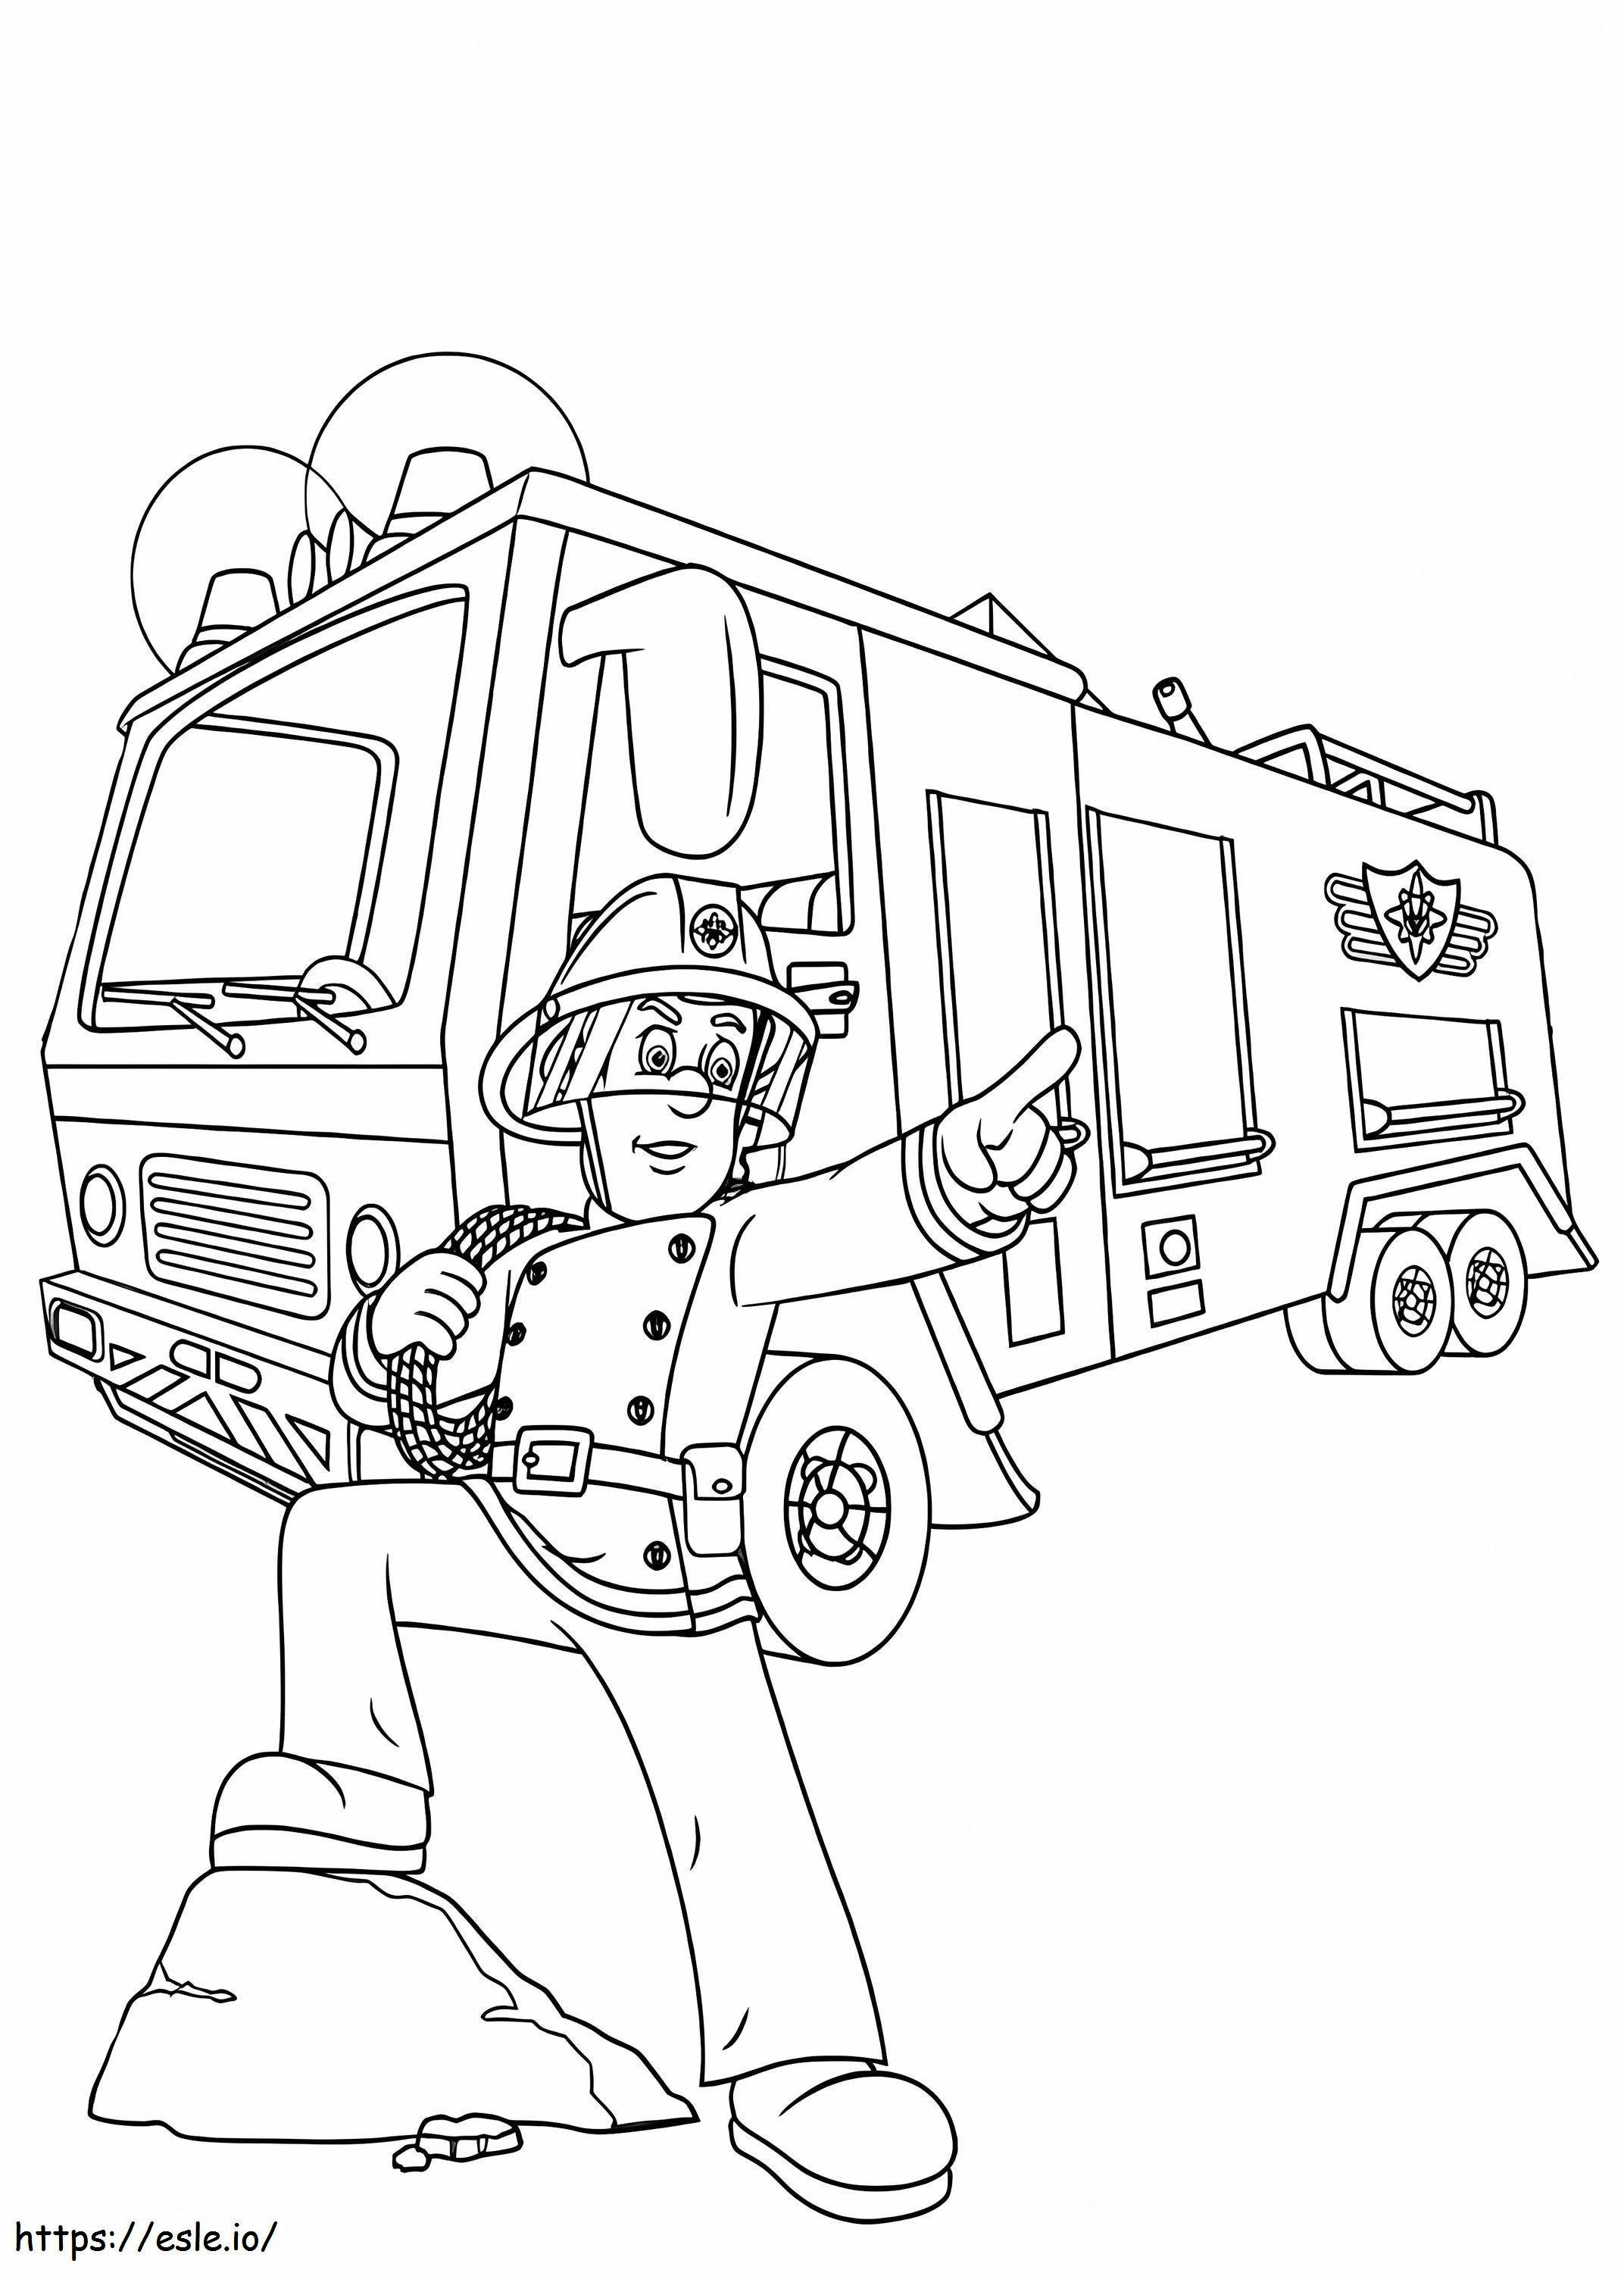 Cool Firefighter Sam With Fire Truck coloring page